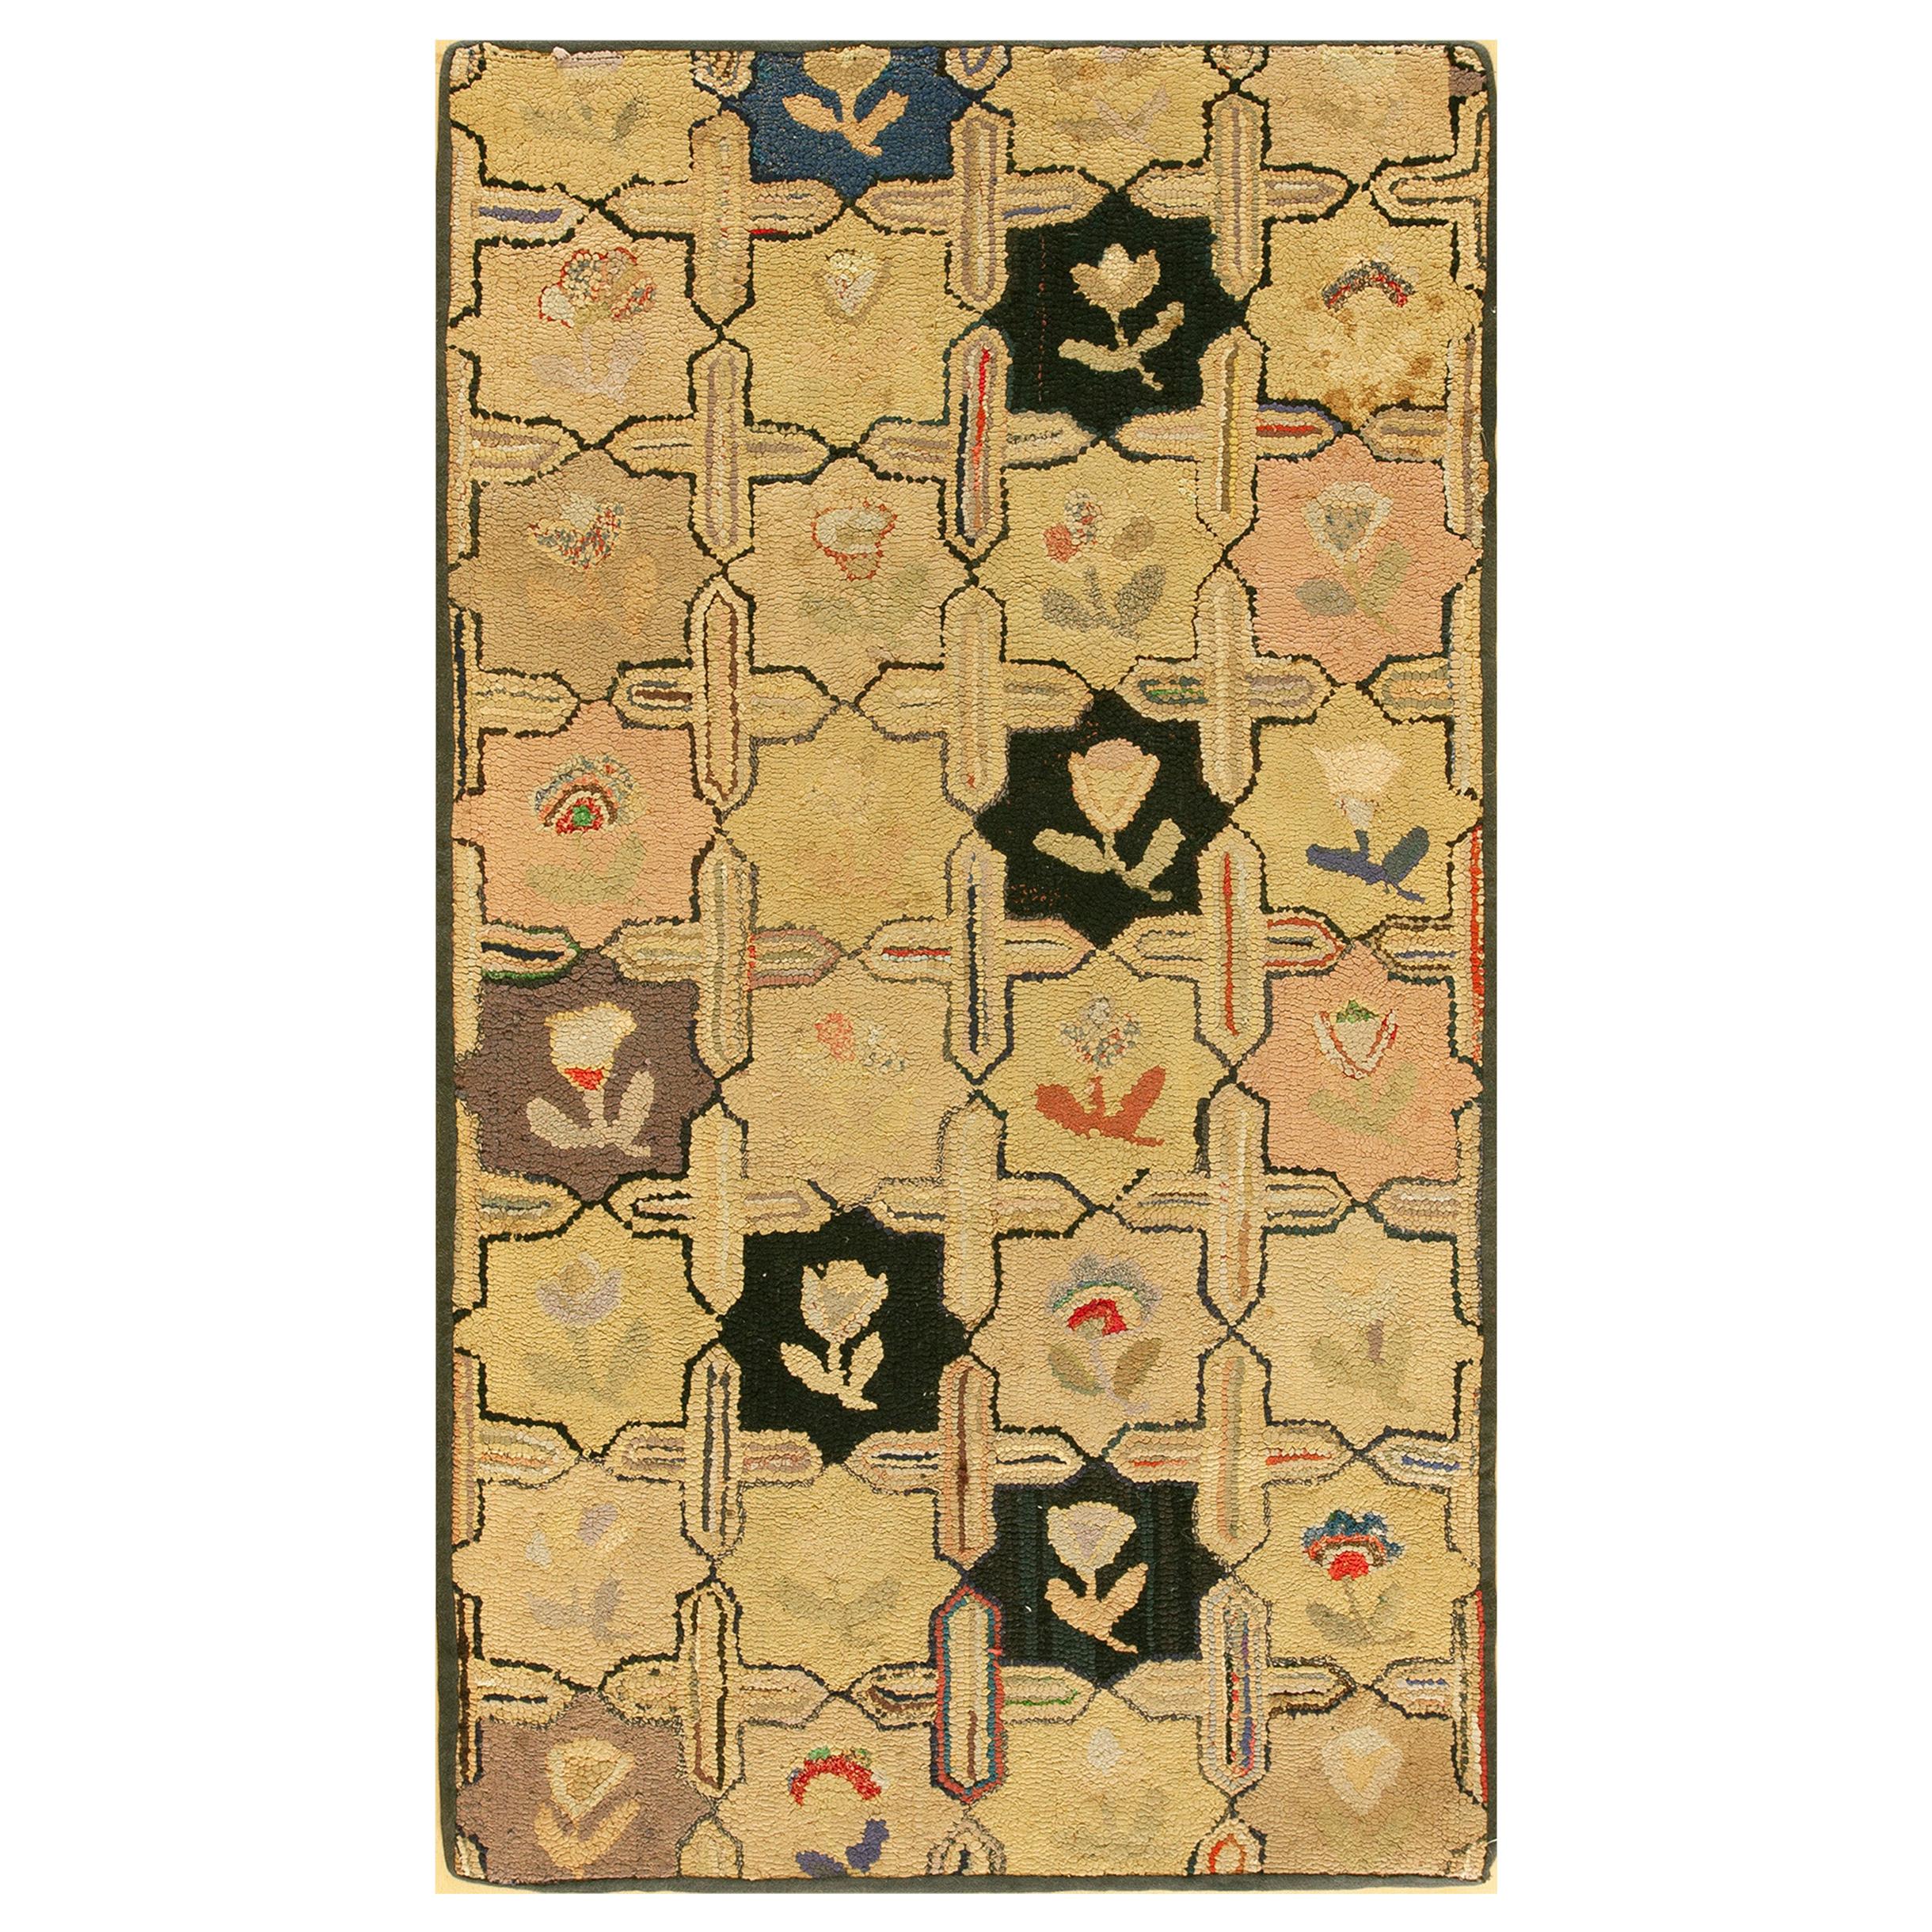 Early 20th Century American Hooked Rug ( 2'5" x 4'3" - 74 x 130 ) For Sale